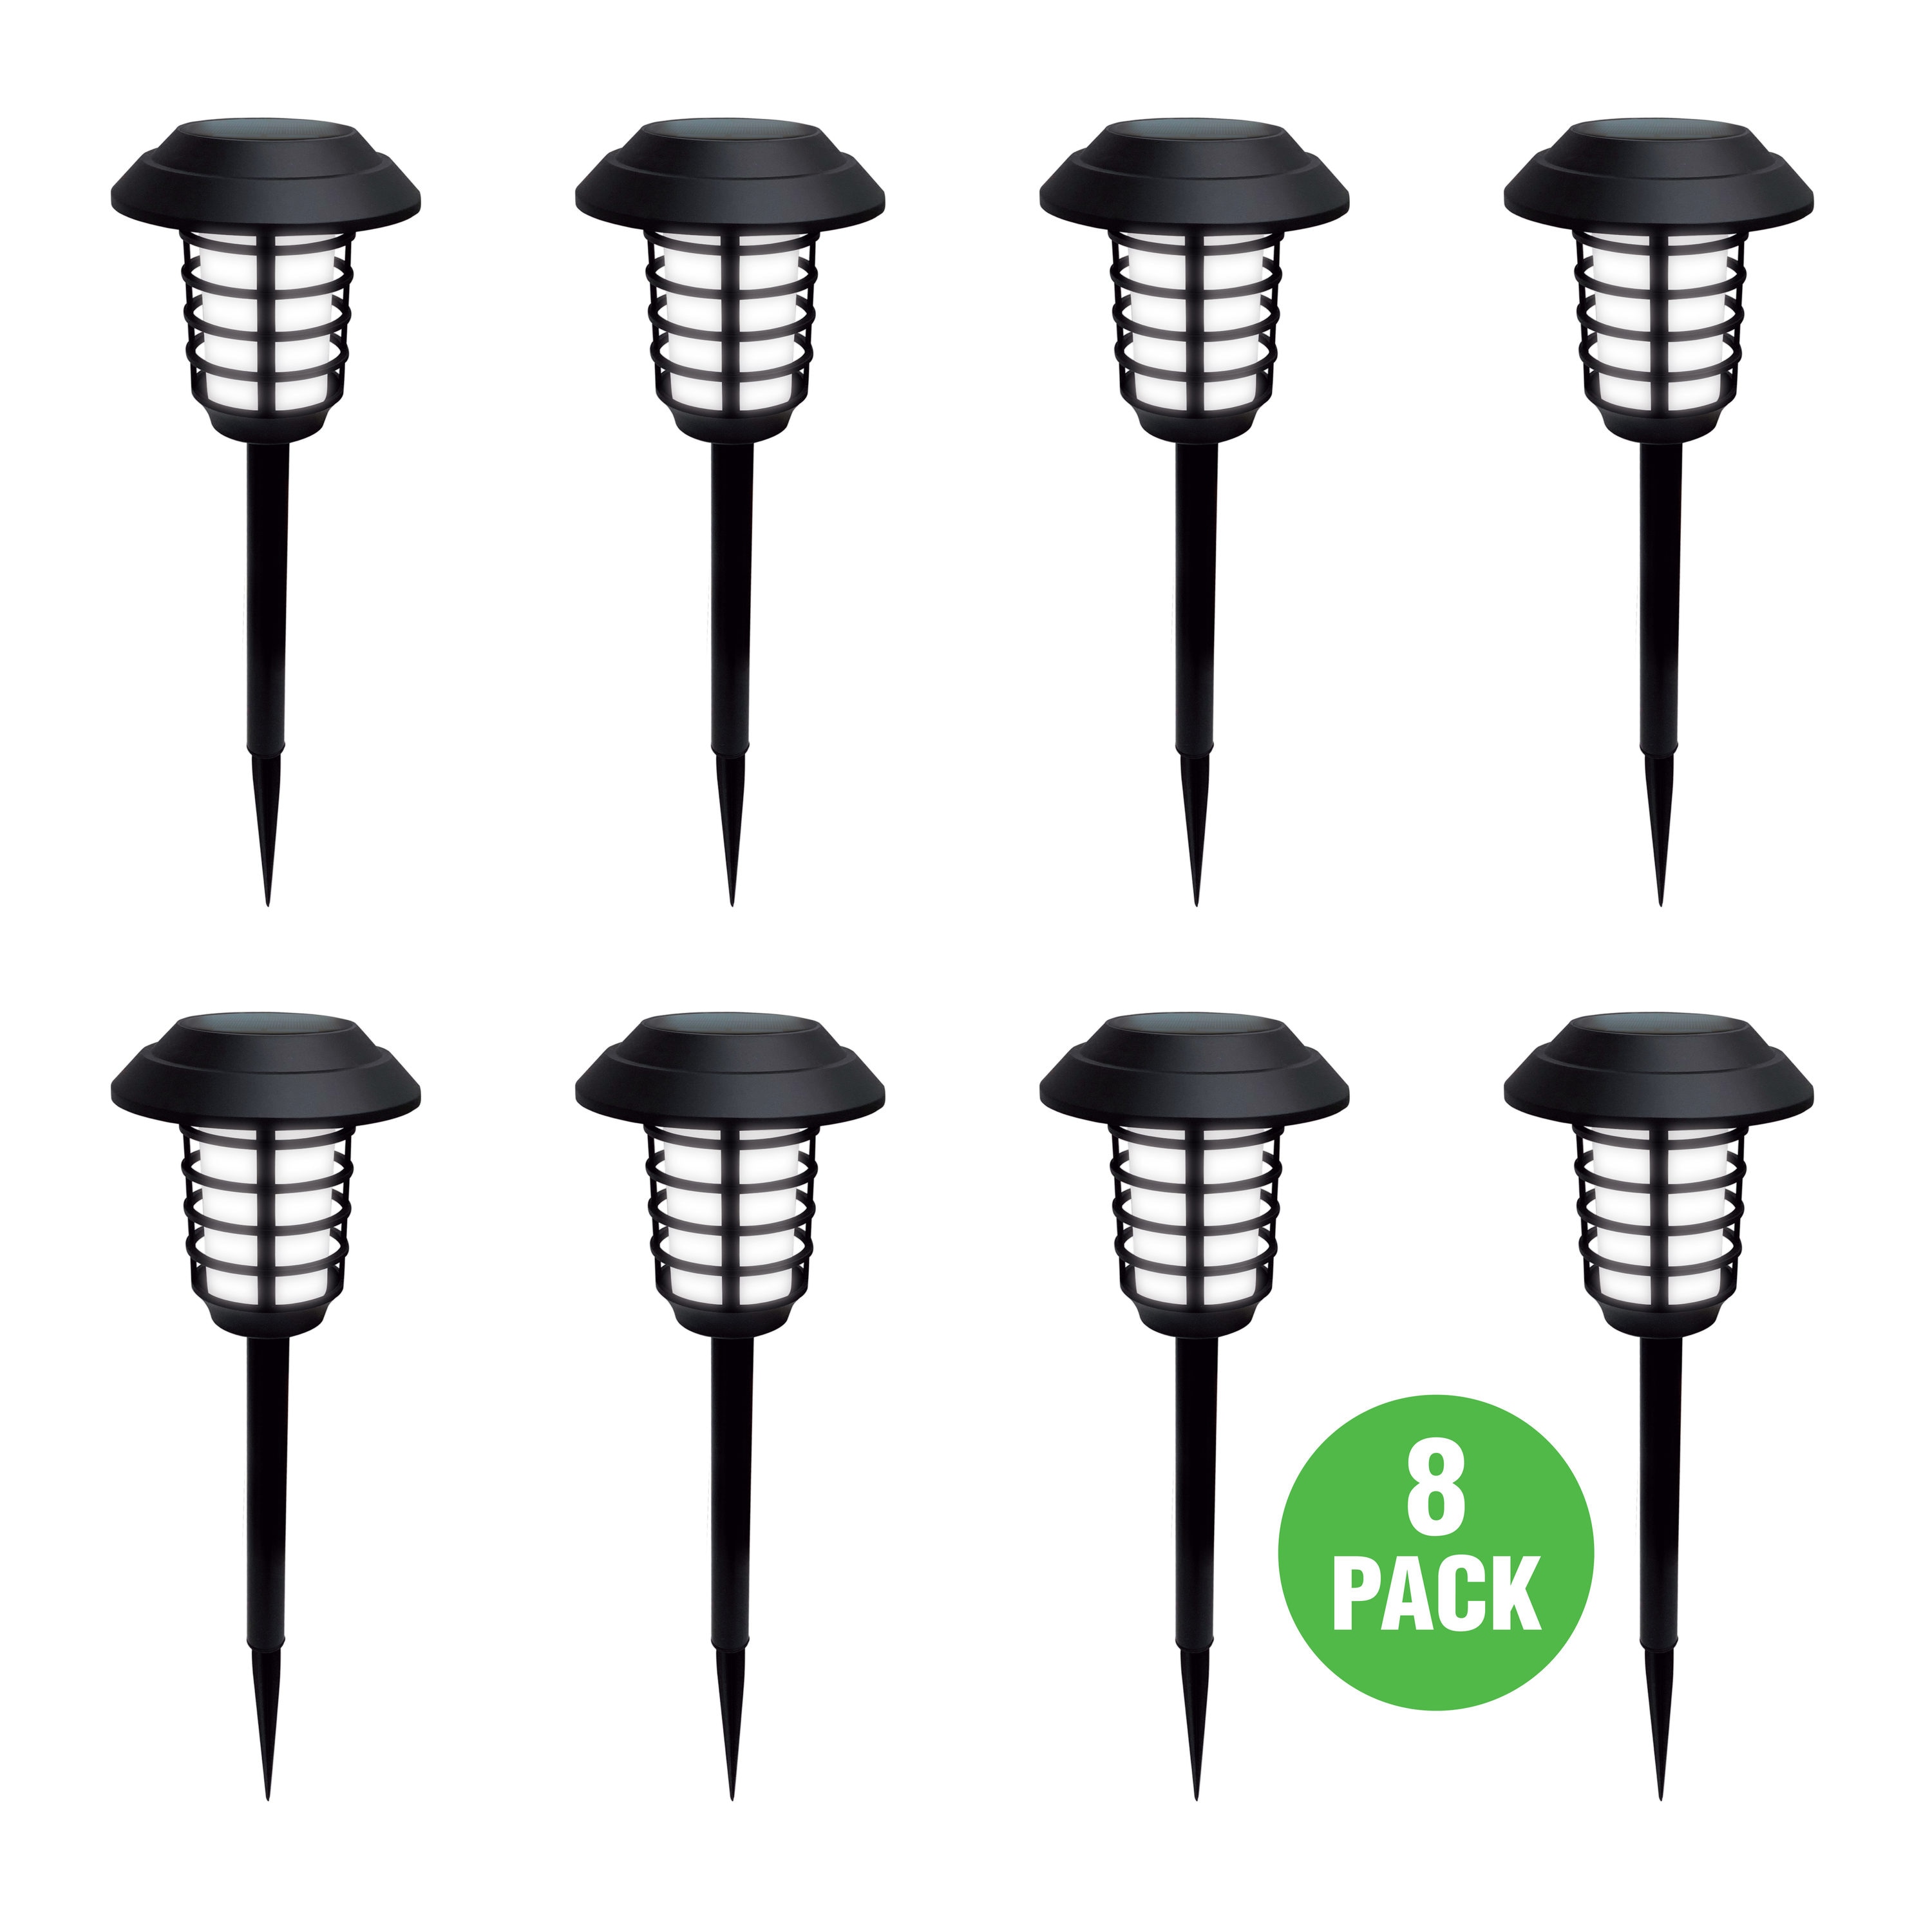 BELL + HOWELL 8-Pack Solar Pathway Lights 21-Lumen Black Solar LED Outdoor  Path Light (6000 K) in the Path Lights department at